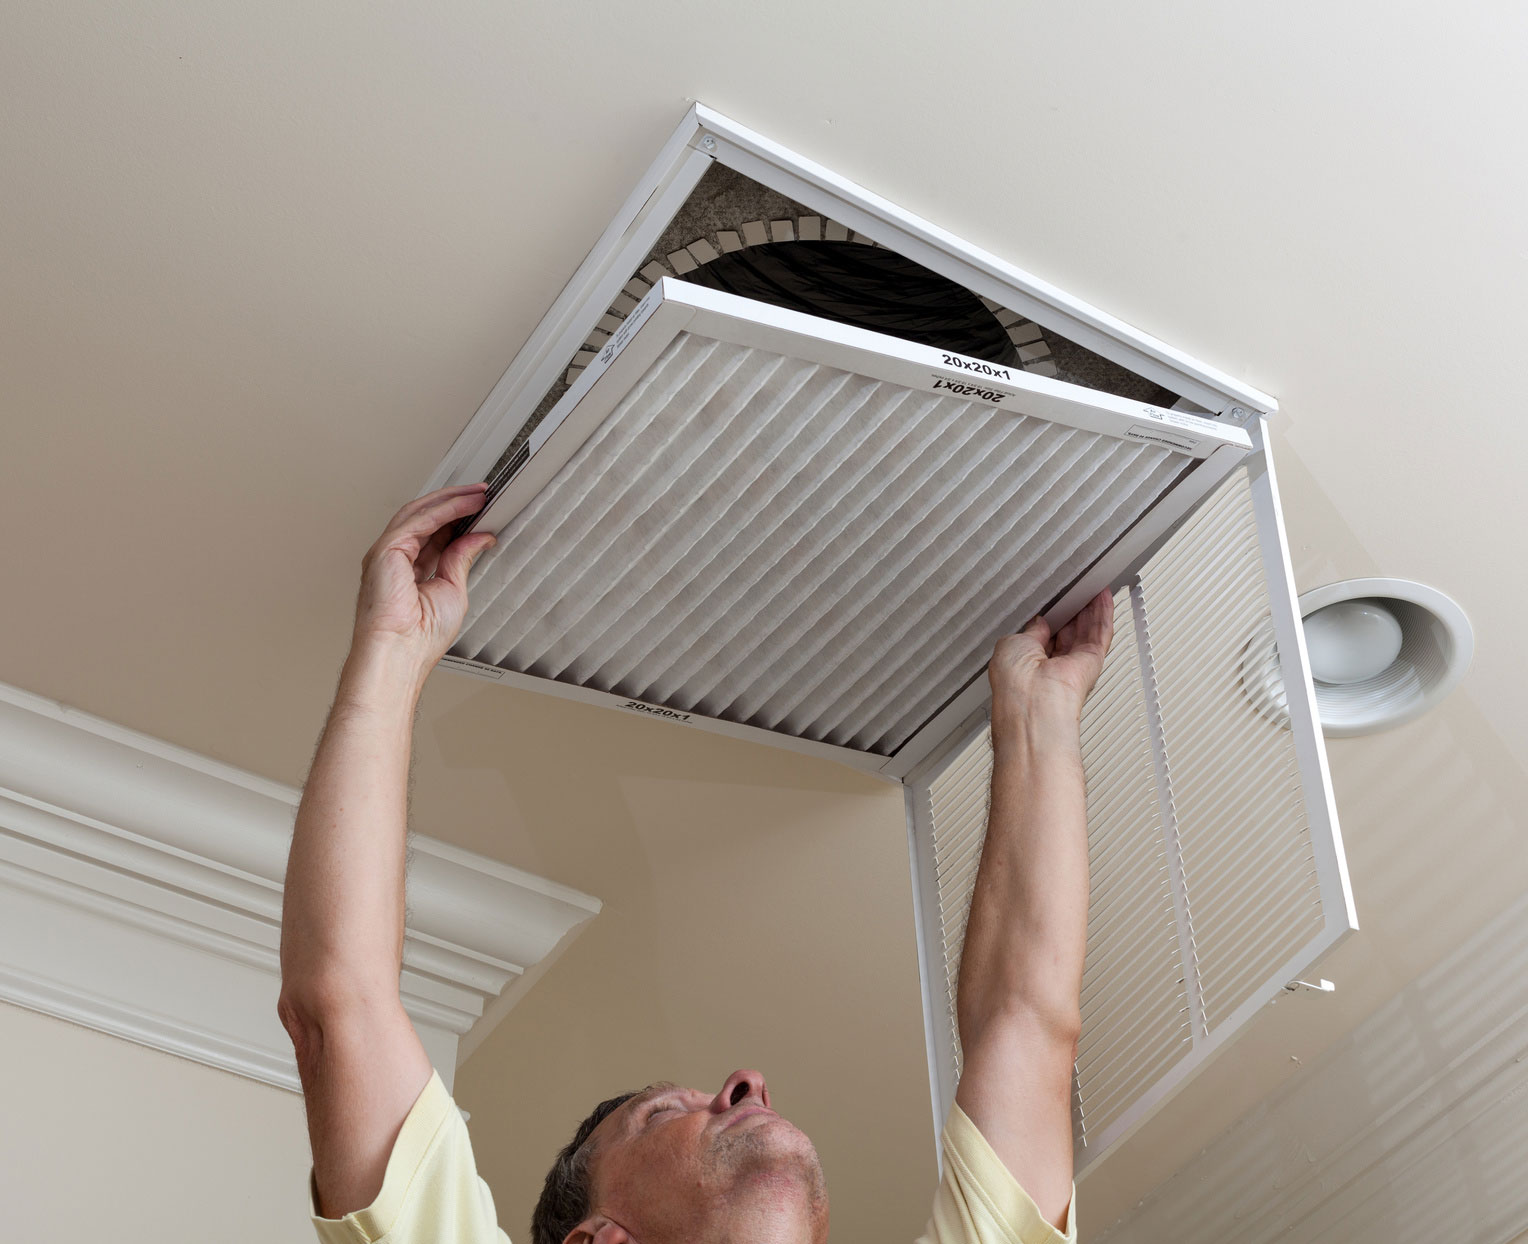 Del Rio Air Conditioning and Electricians recommend frequent air filter changes.